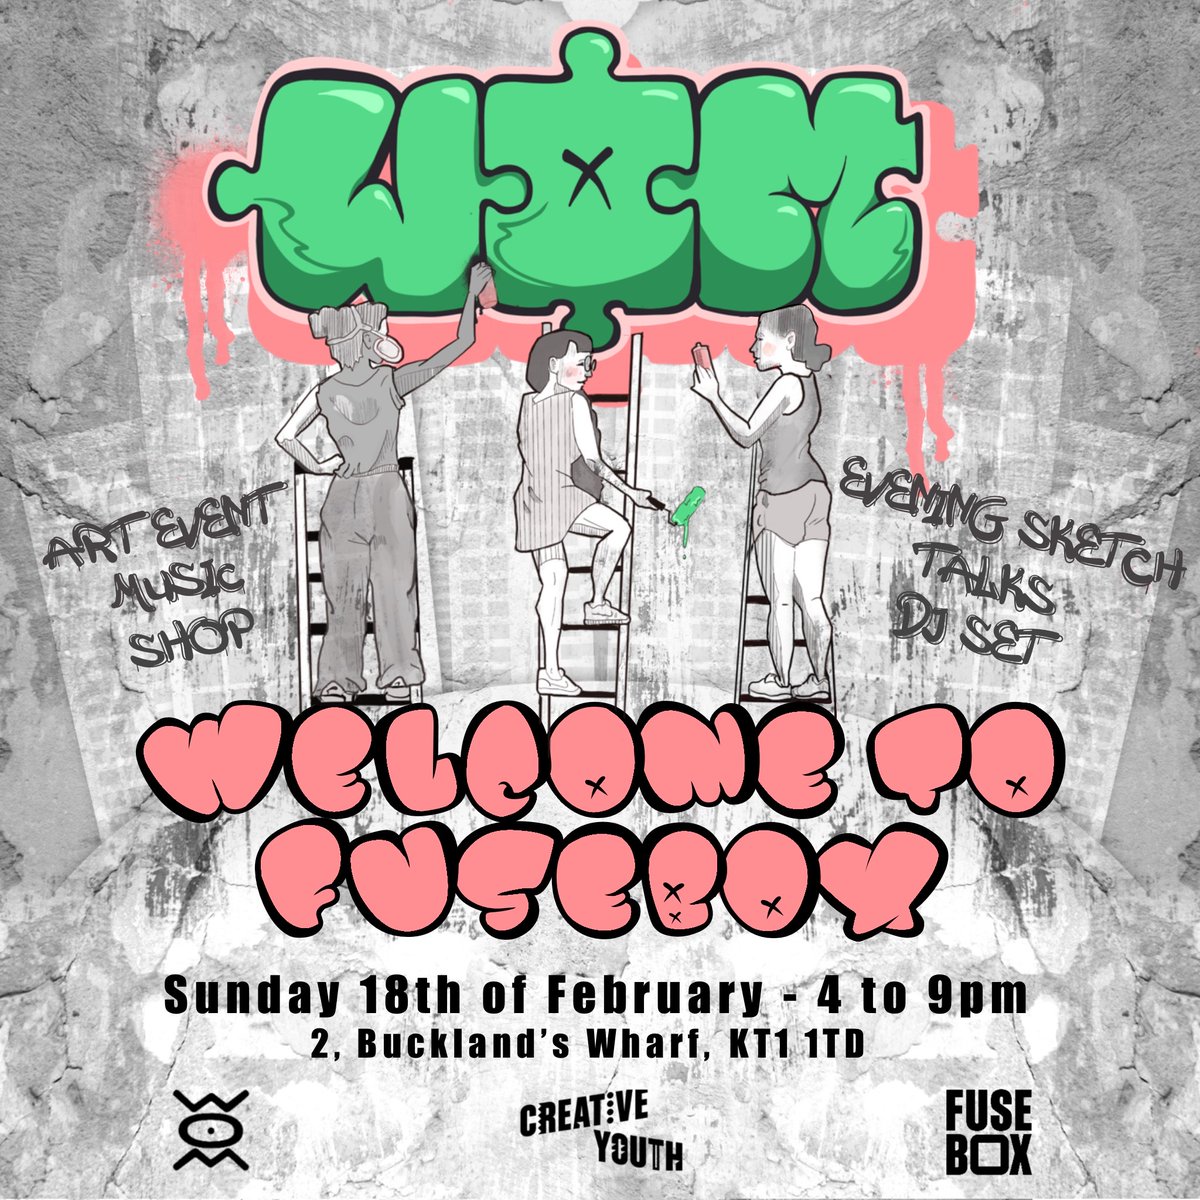 Get ready for @womcollective takeover of FUSEBOX on Sunday 18 February (16:00 - 21:00)... Free Entry 💥 WOM will be running a drop-in sketch session, pop up shop, as well as hosting a talk for Kingston locals to get to know the collective. Learn more: creativeyouthcharity.org/events/wom-wel…